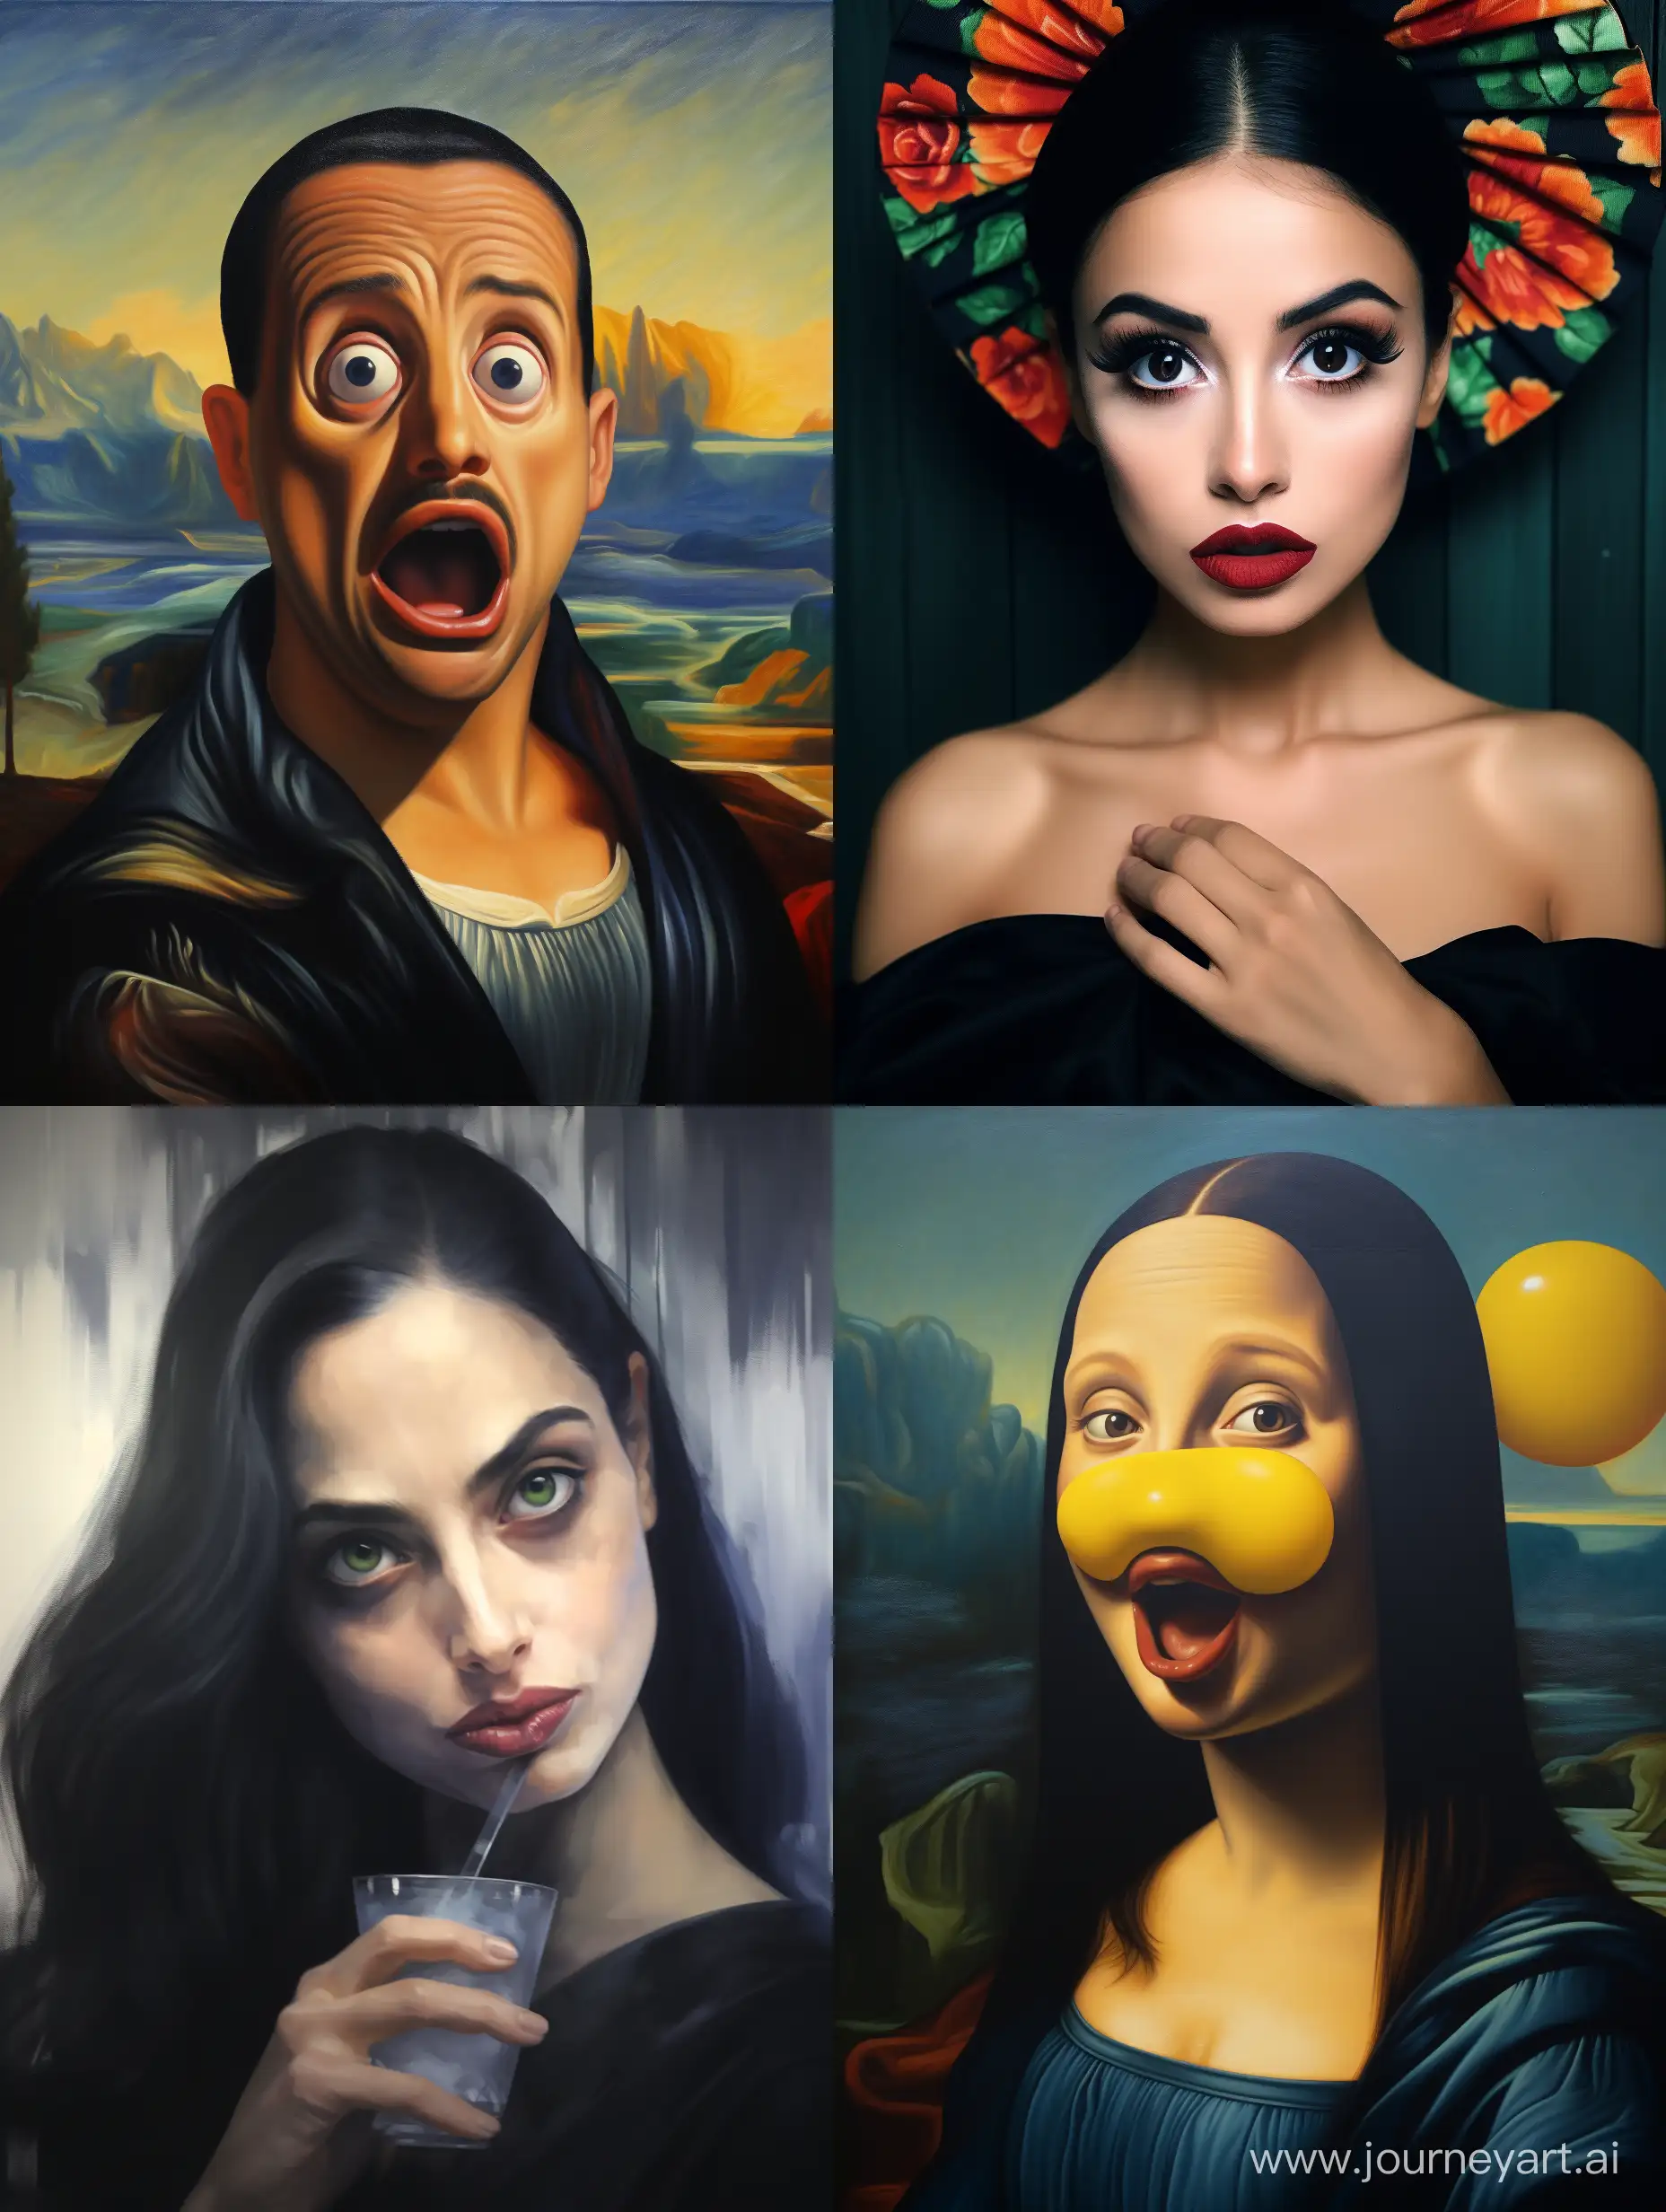 Mona-Lisa-Reacts-with-Disgust-Artistic-Representation-of-a-Famous-Portrait-in-a-Humorous-Twist